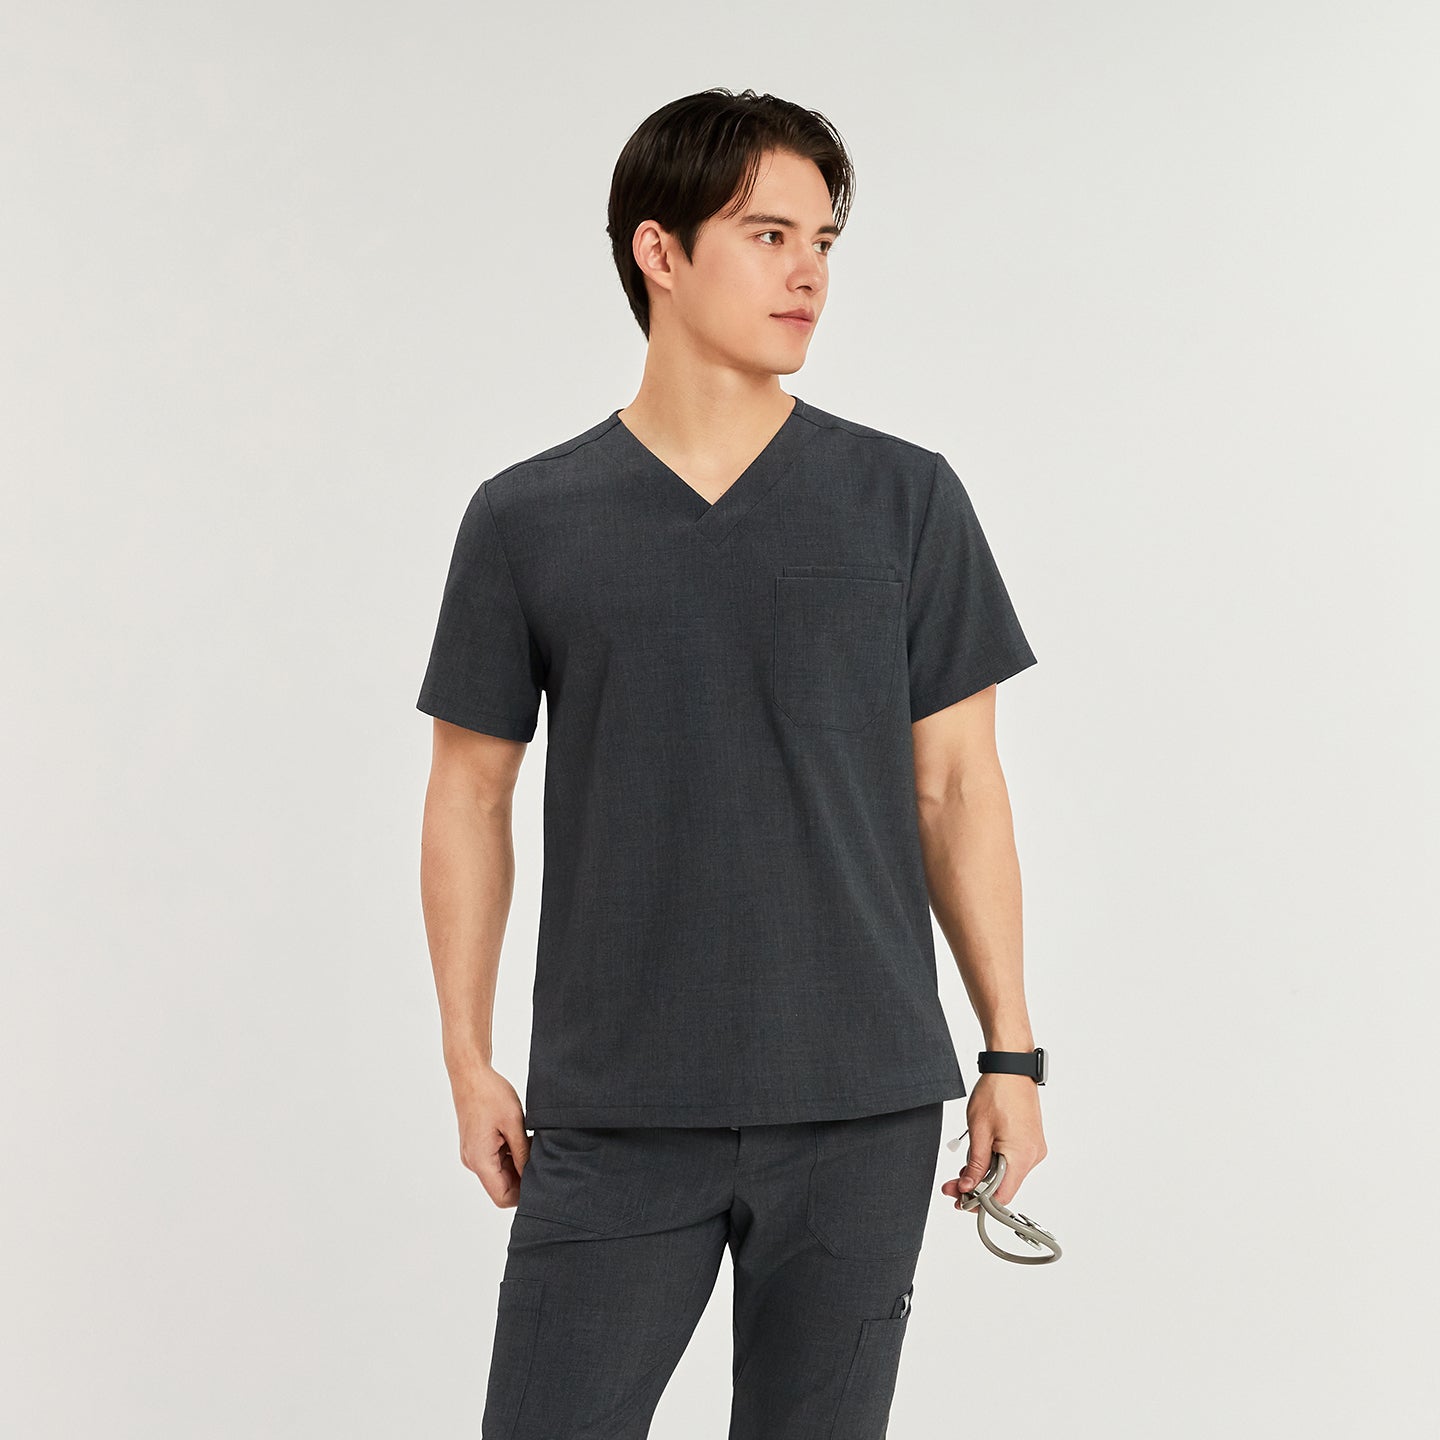 Male model wearing a charcoal gray 3-pocket scrub top, standing and looking to the side. He is holding a stethoscope in his right hand,Charcoal Gray